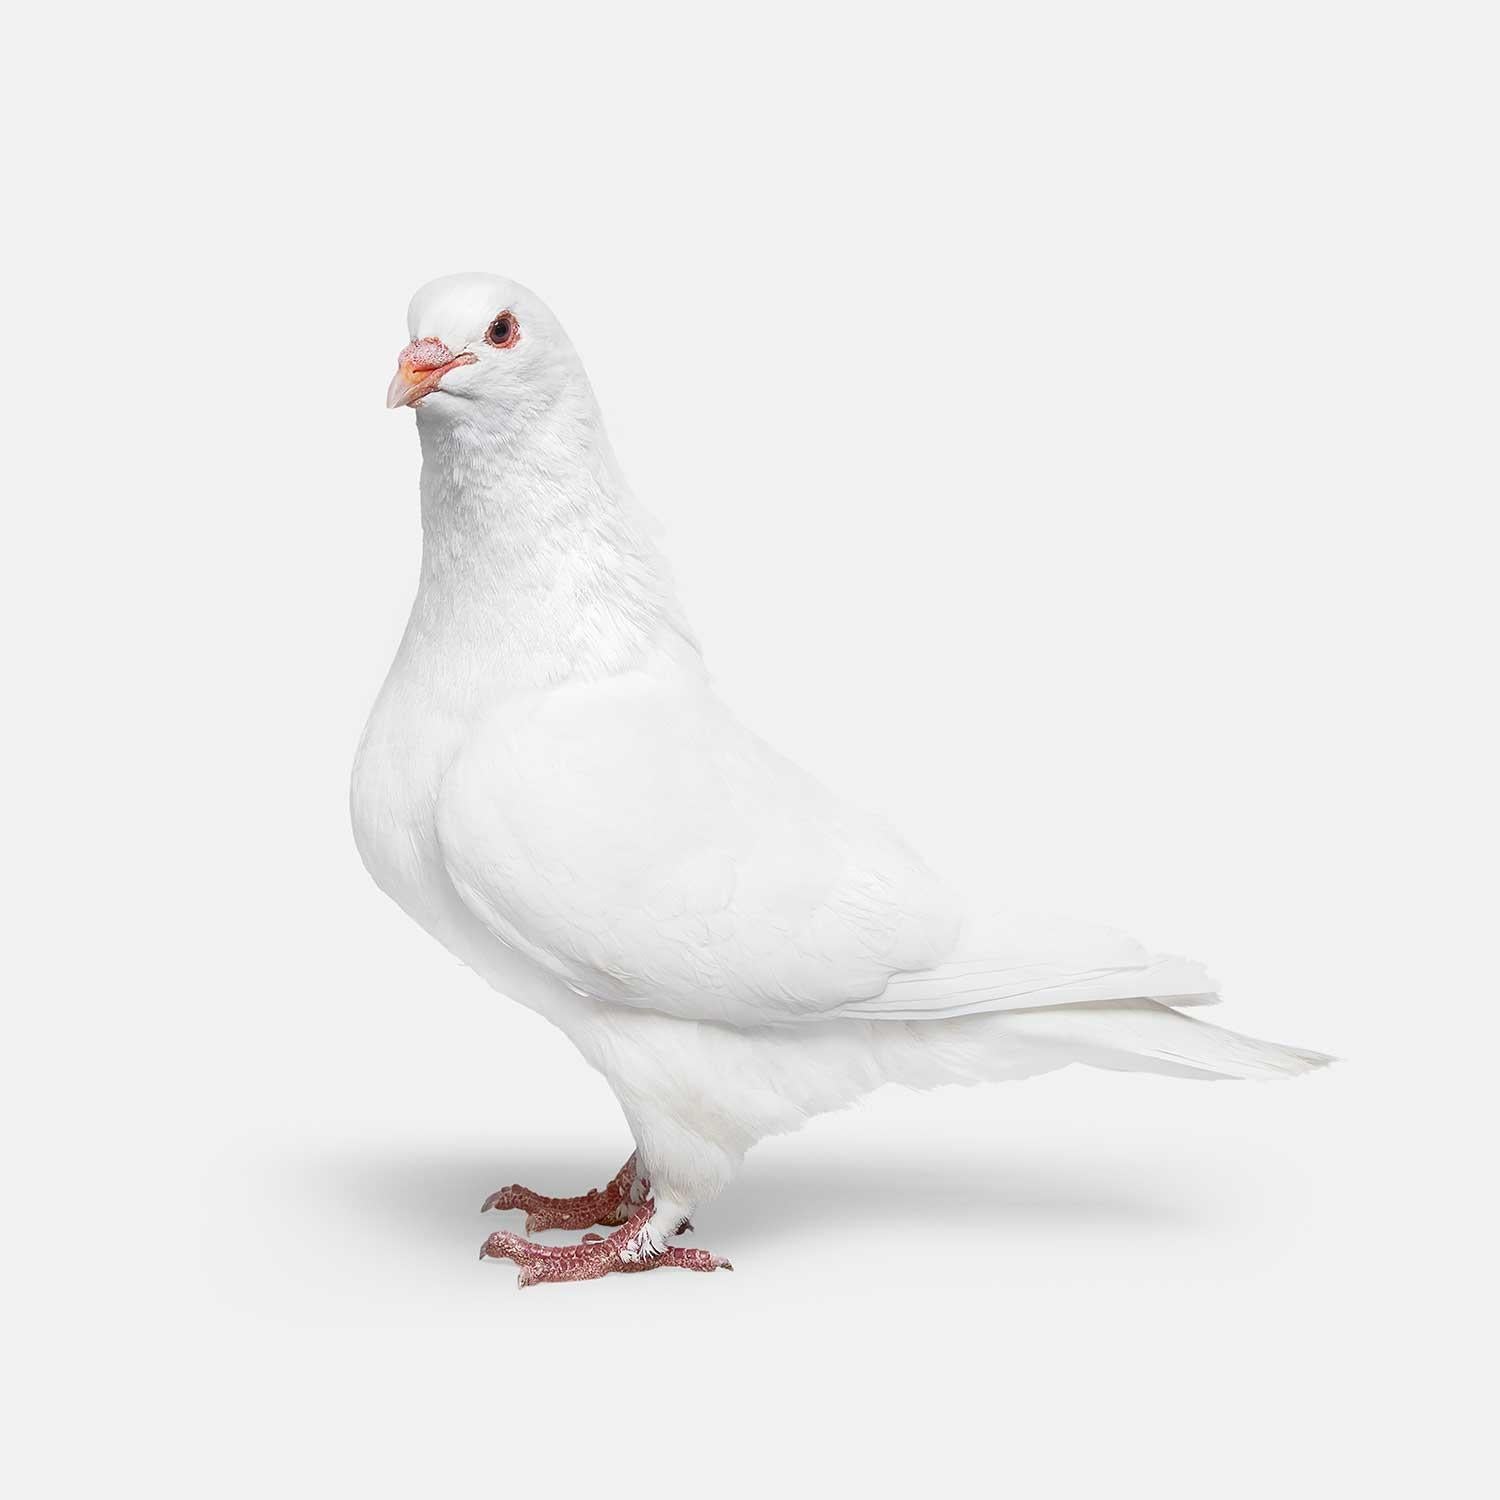 Randal Ford Color Photograph - Pigeon No. 1 (40" x 50")